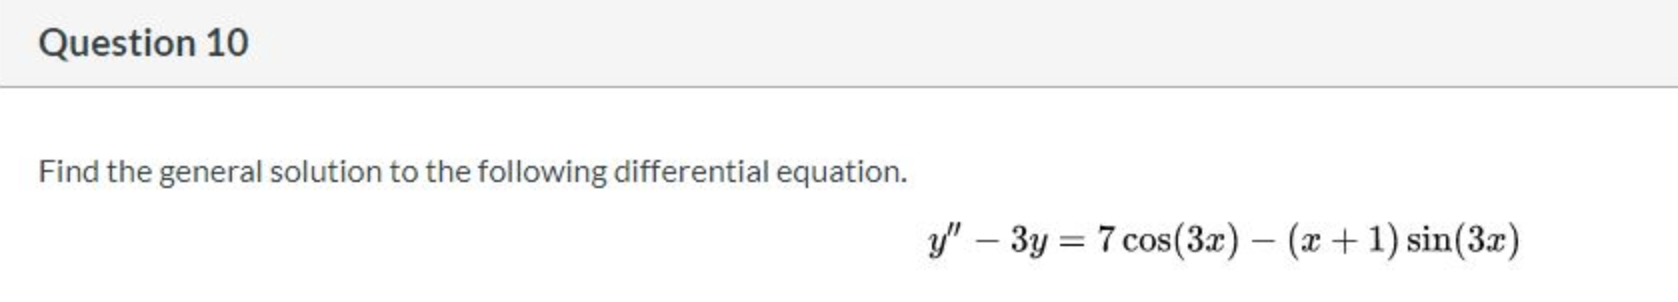 Find the general solution to the following differential equation.
y" – 3y = 7 cos(3x) – (x+ 1) sin(3x)
|
